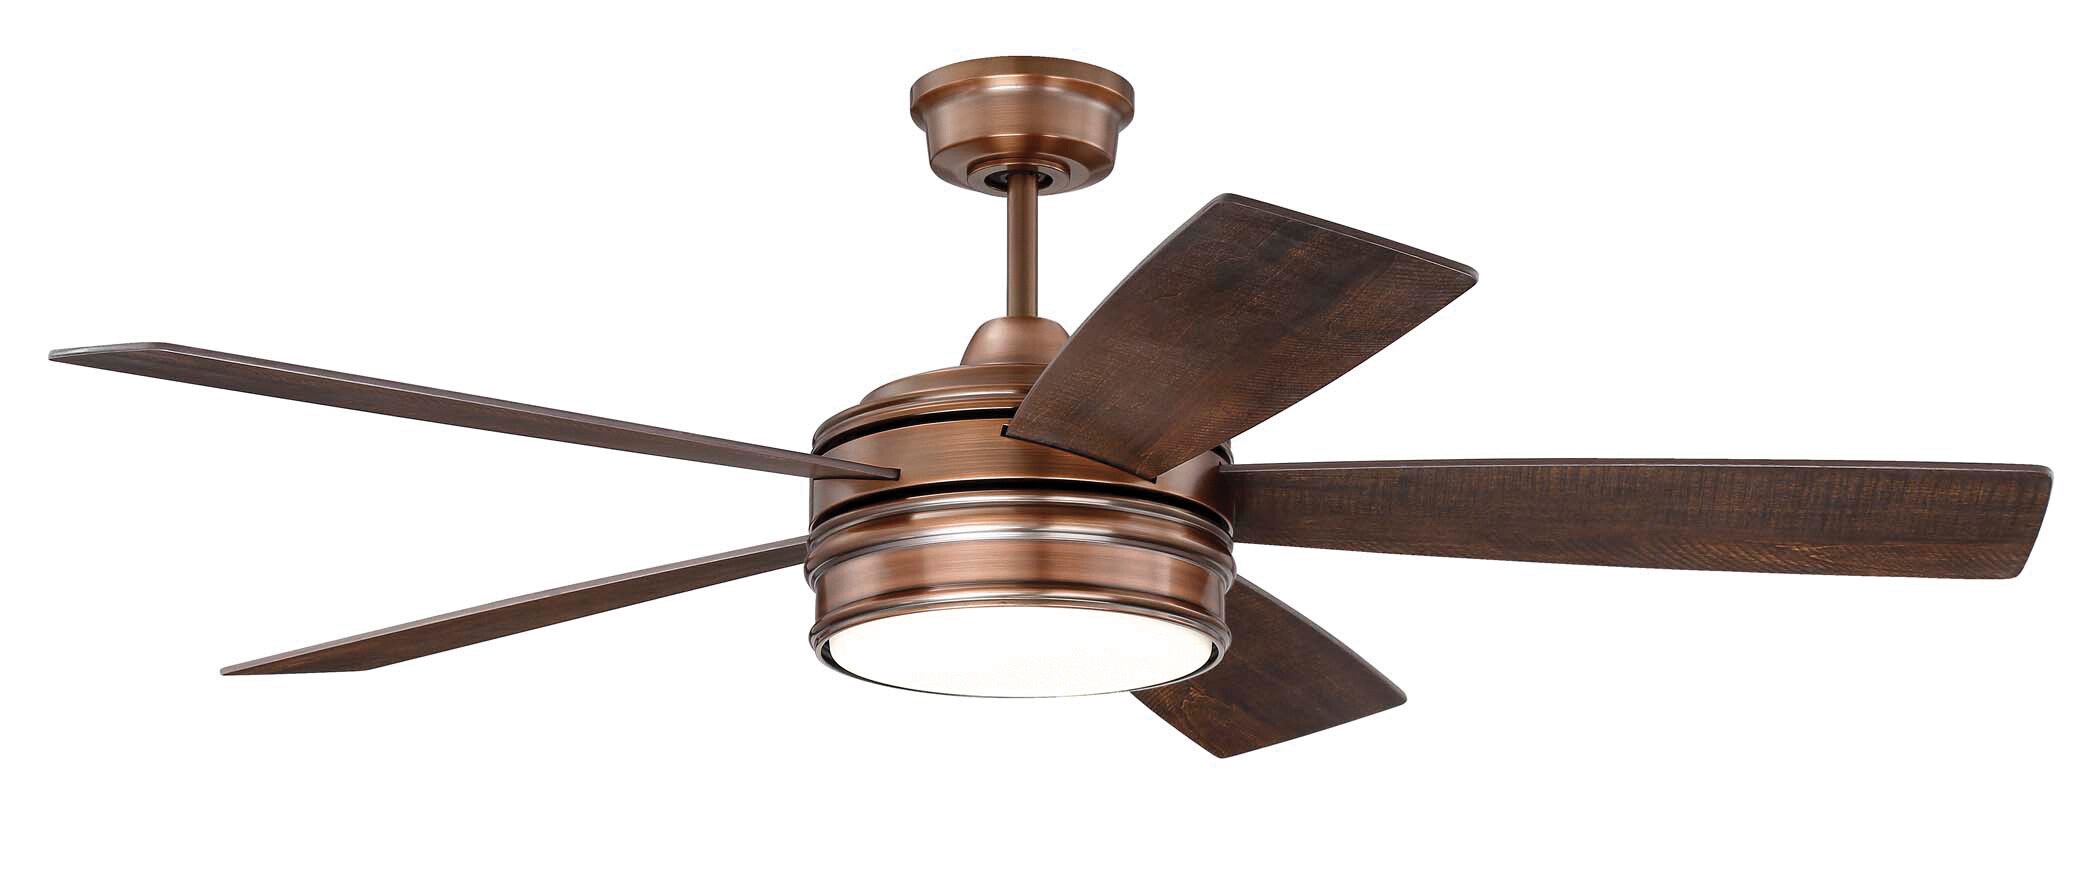 Craftmade Braxton 52-in Brushed Copper LED Indoor Ceiling Fan with ...